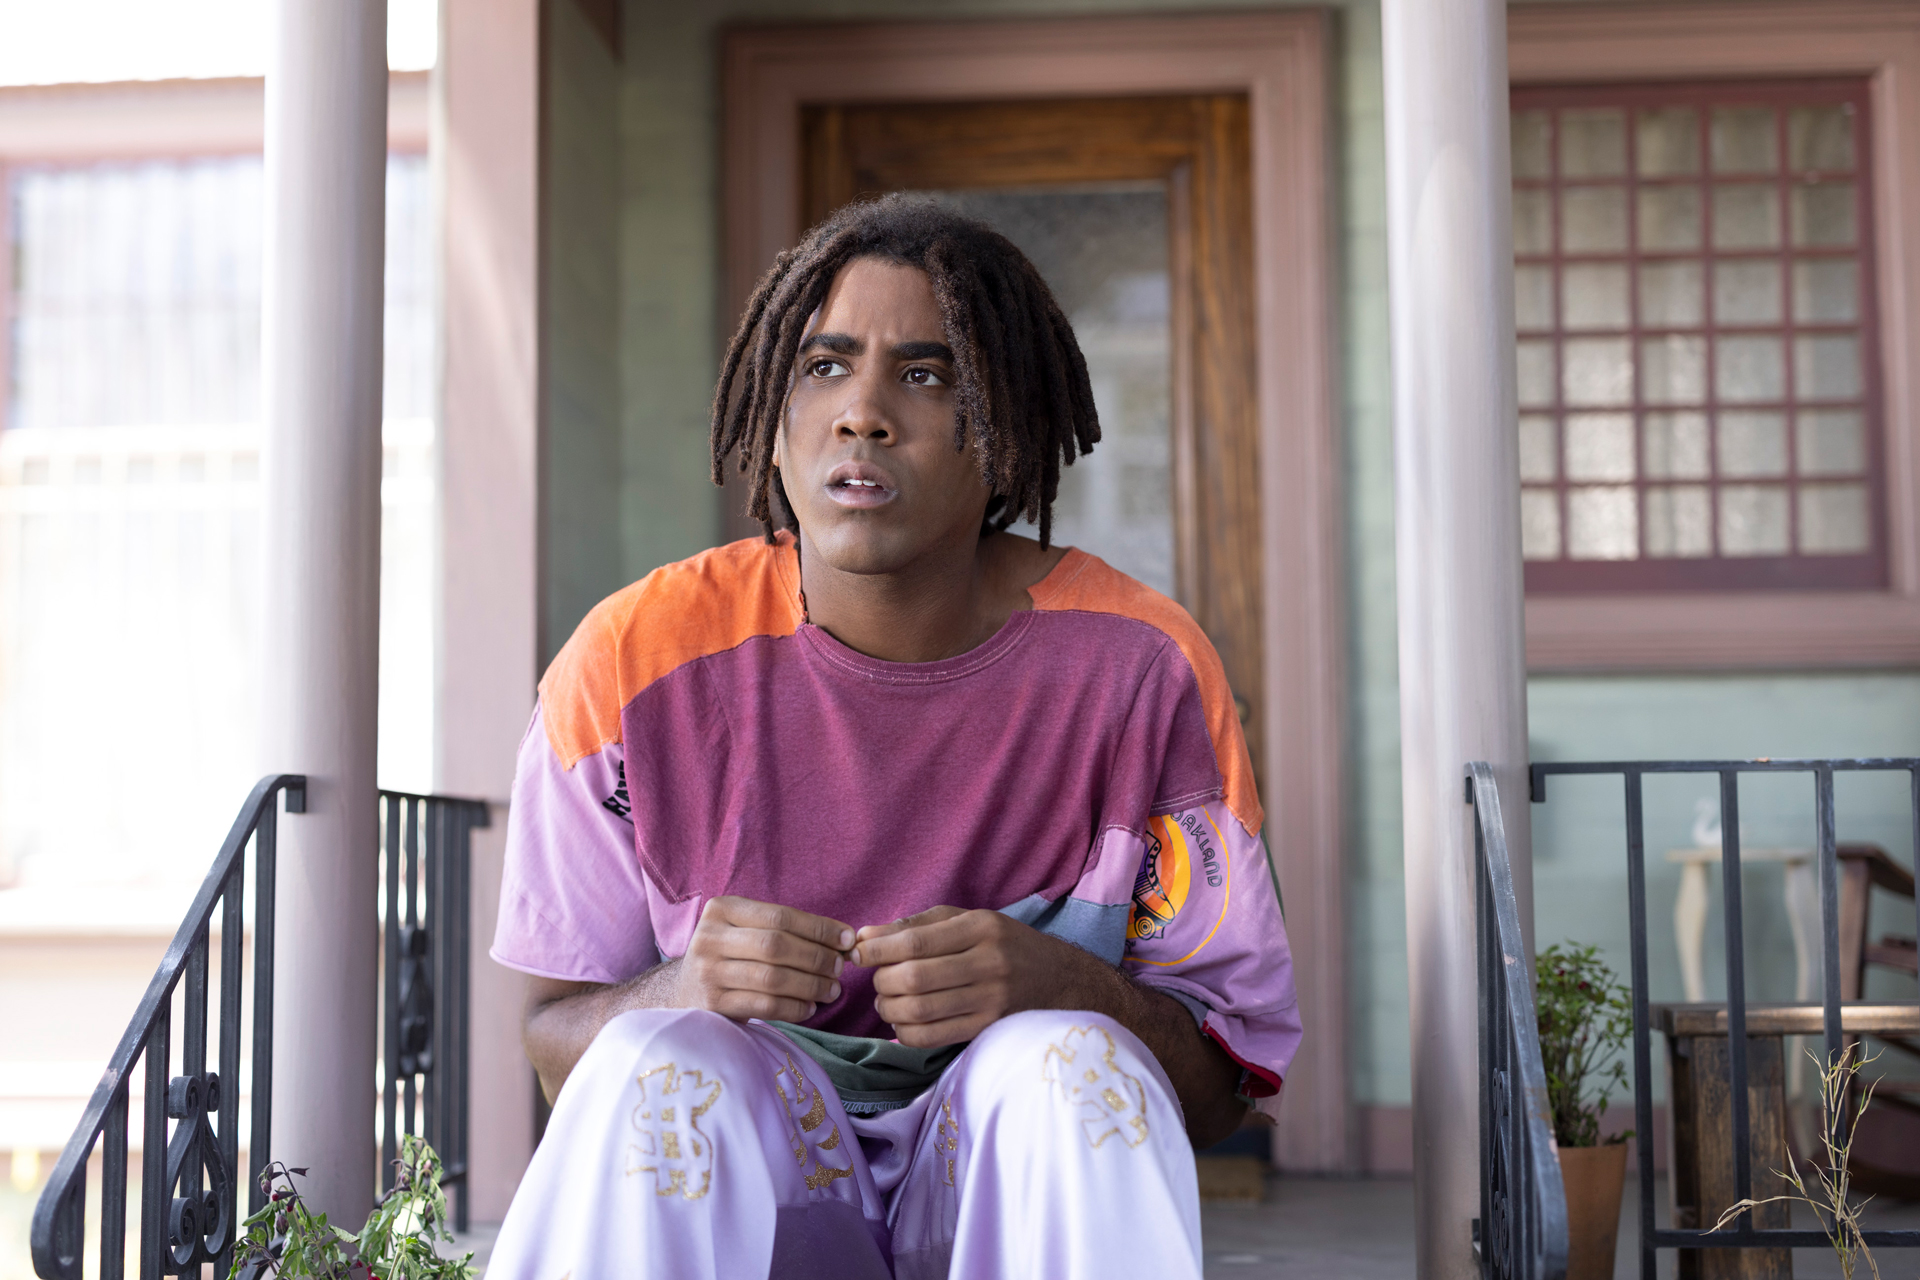 A giant Black man with locs sits on front steps in purple outfit